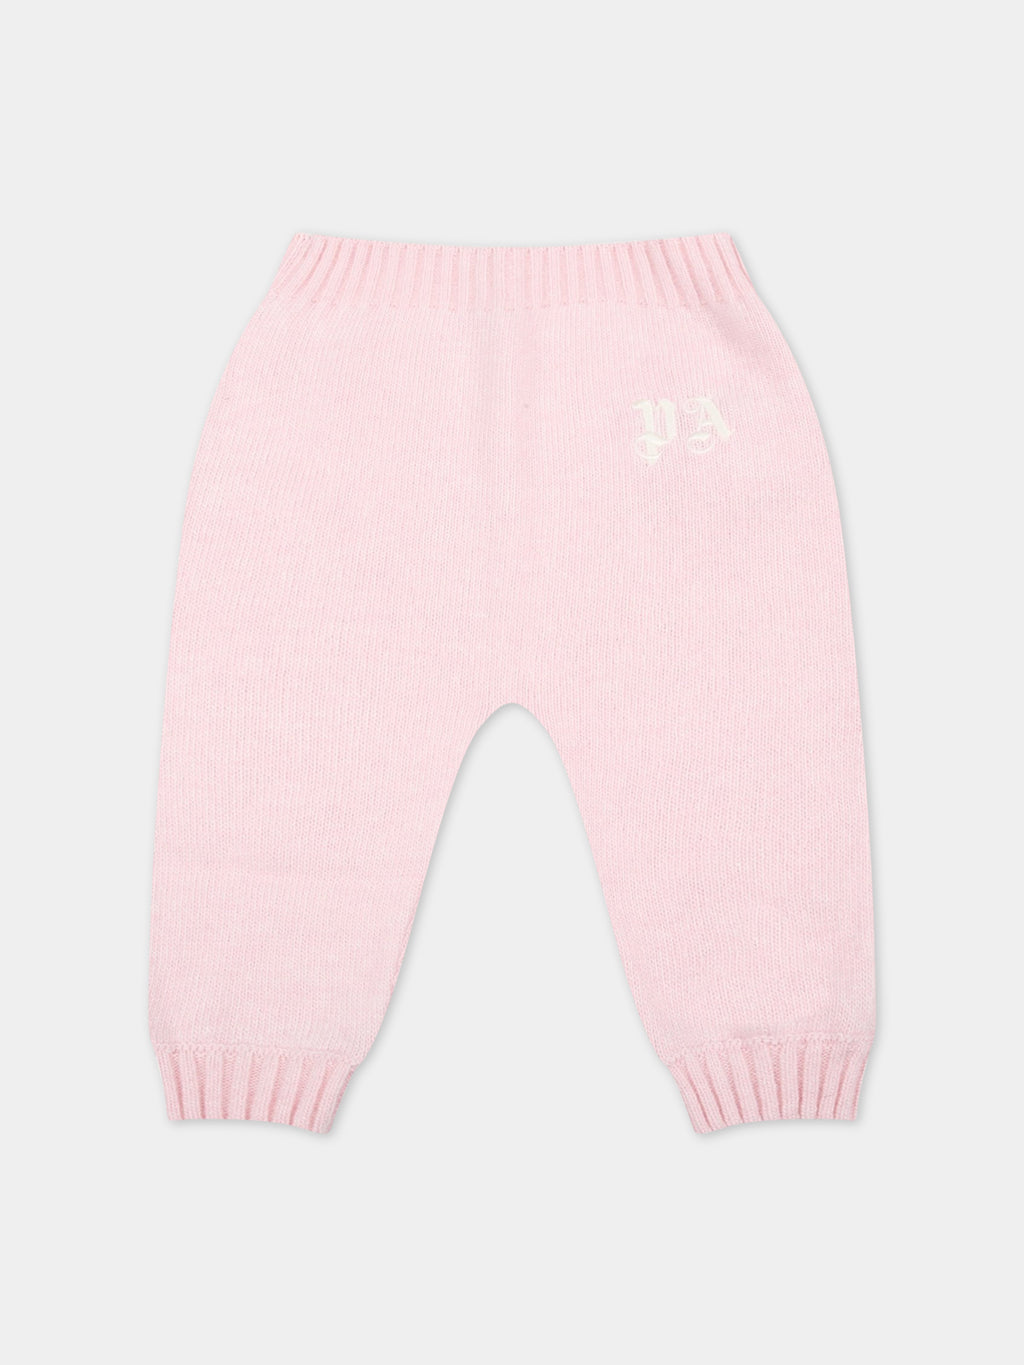 Pink trousers for baby girl with white logo